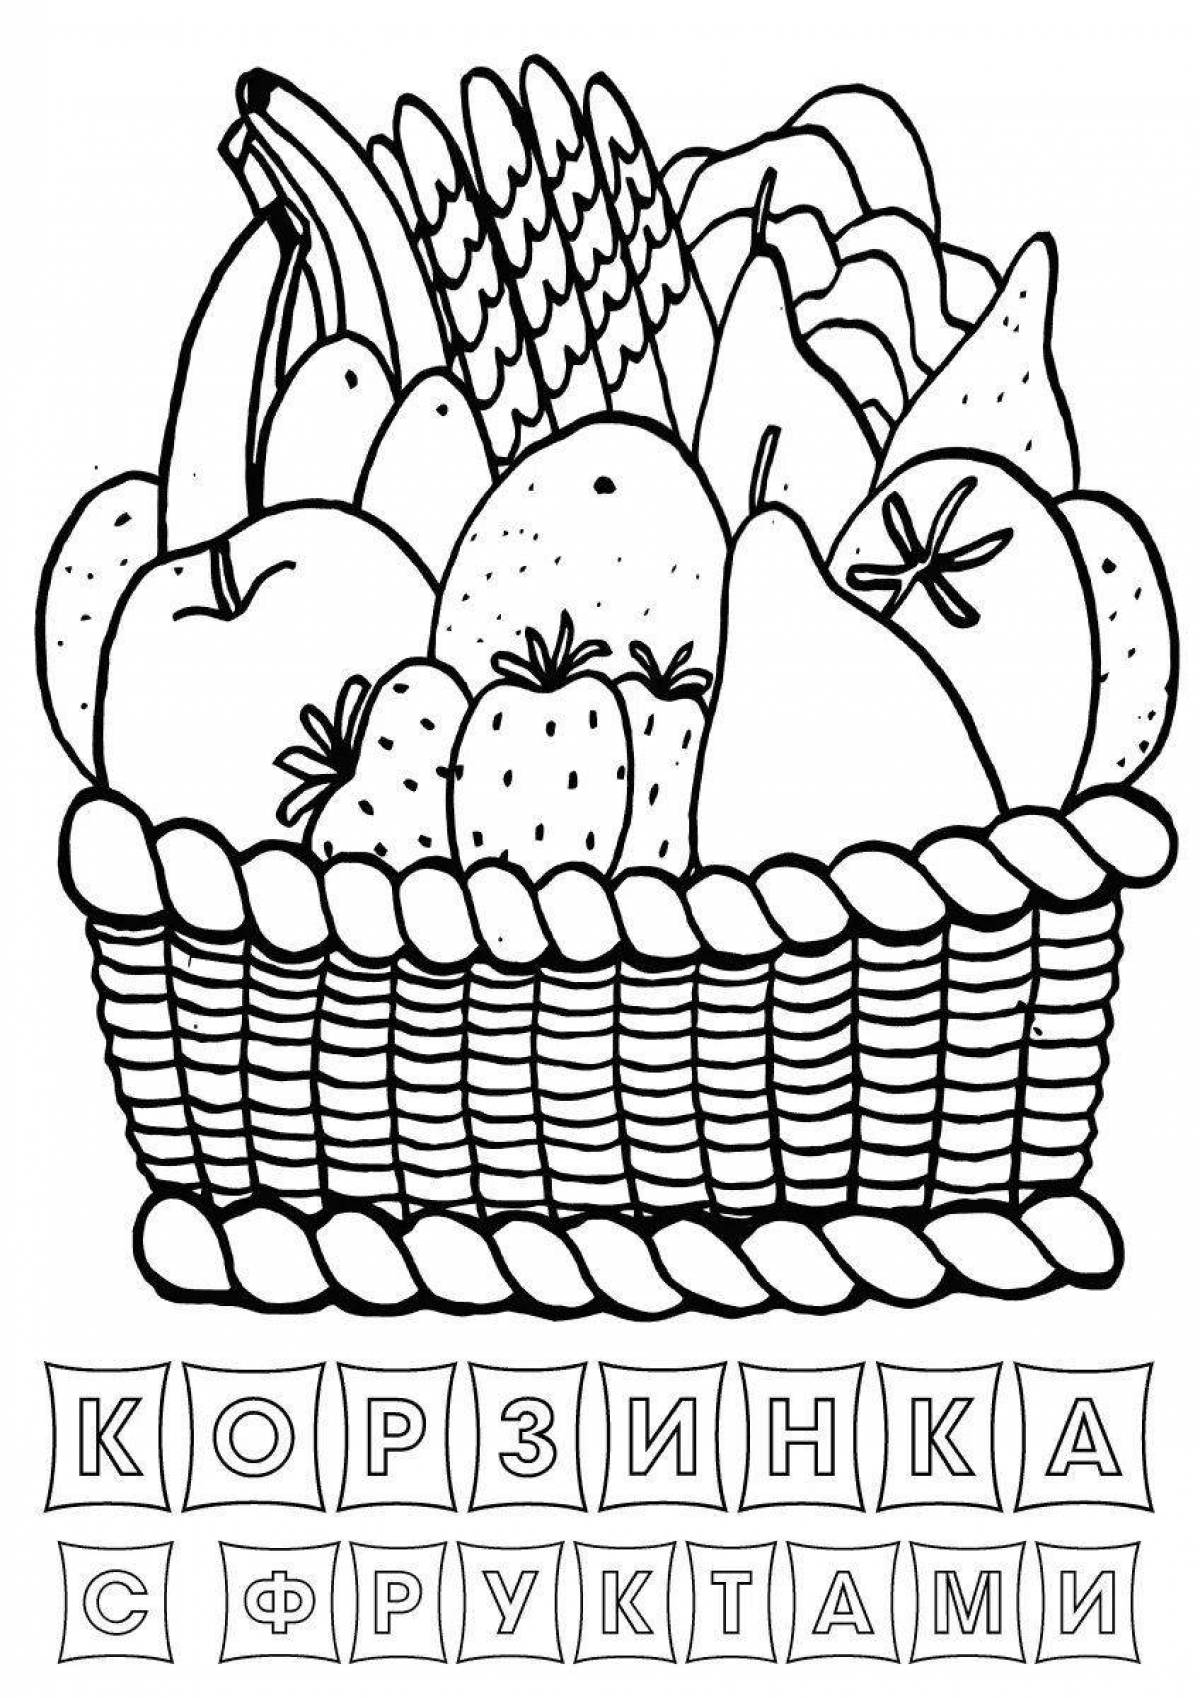 Bright fruits and vegetables in a basket